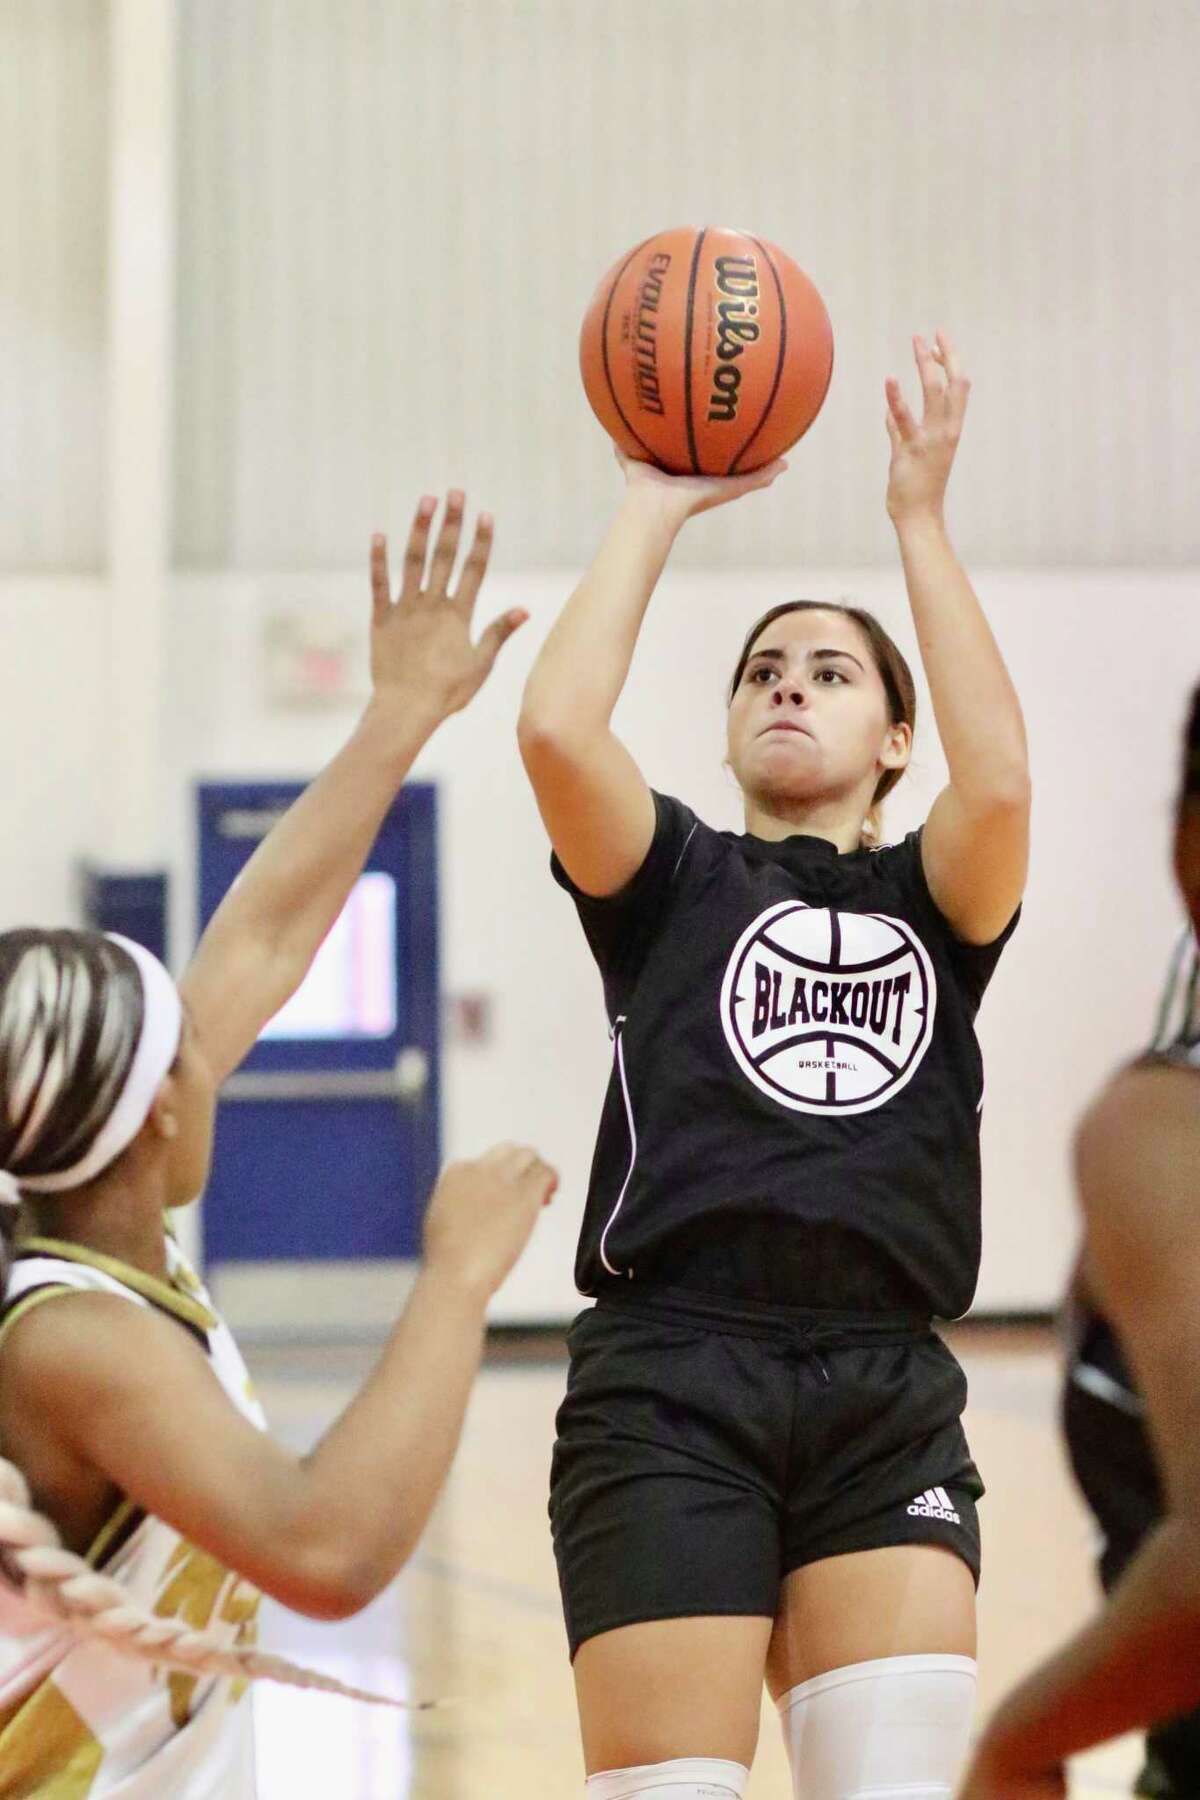 Evelyn Quiroz averaged 13 points, 5 rebounds, 2.5 assists and 2.6 steals per game last season.